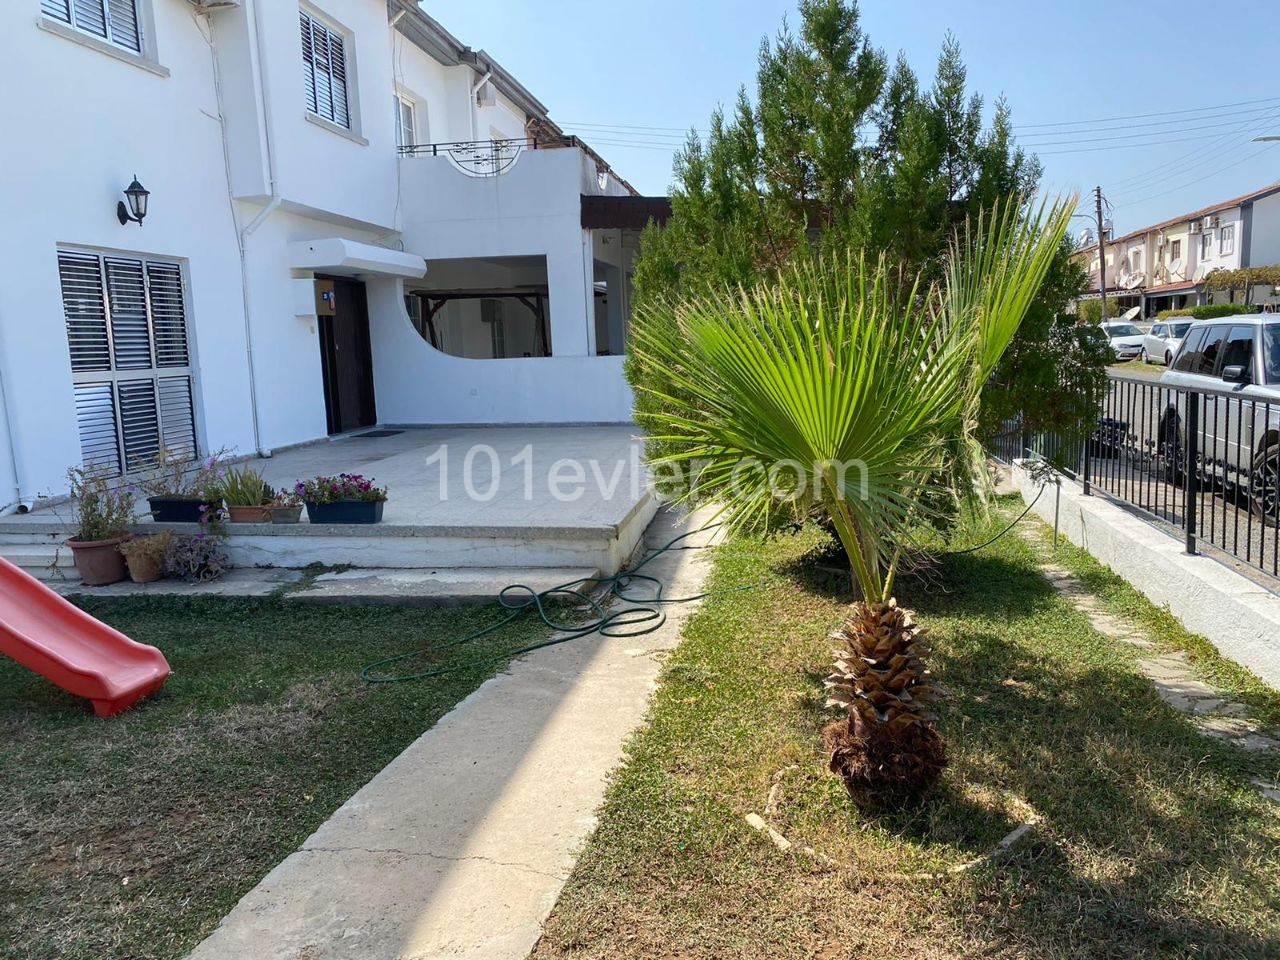 Taşkinköyde 3+ 1 150m2 social housing for sale in a Decked 300m2 plot with full renovation 92,000 stg ** 